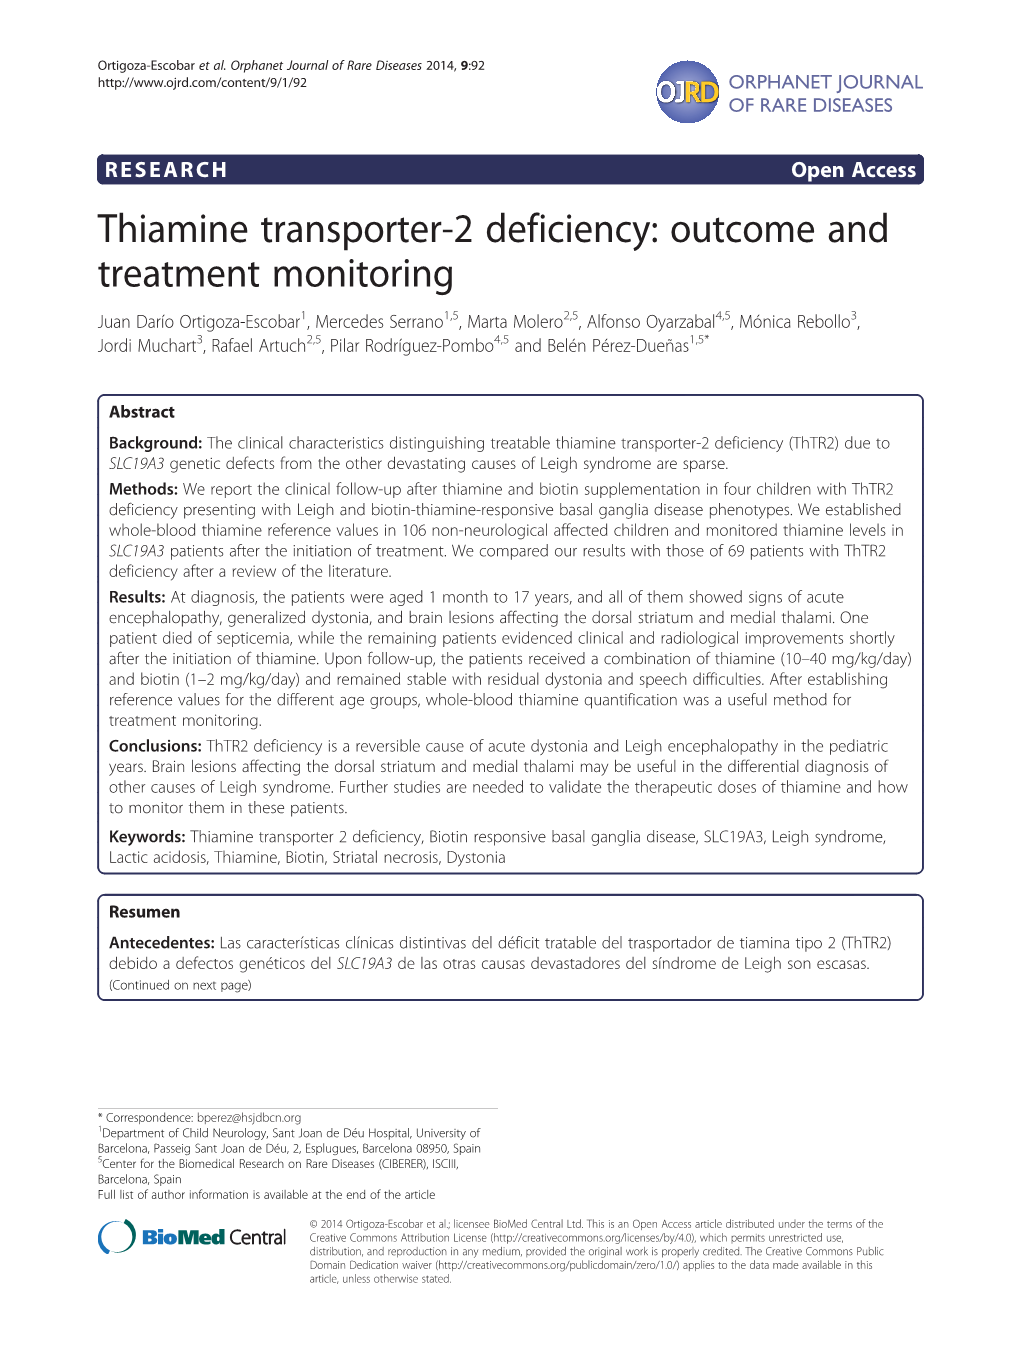 Thiamine Transporter-2 Deficiency: Outcome and Treatment Monitoring